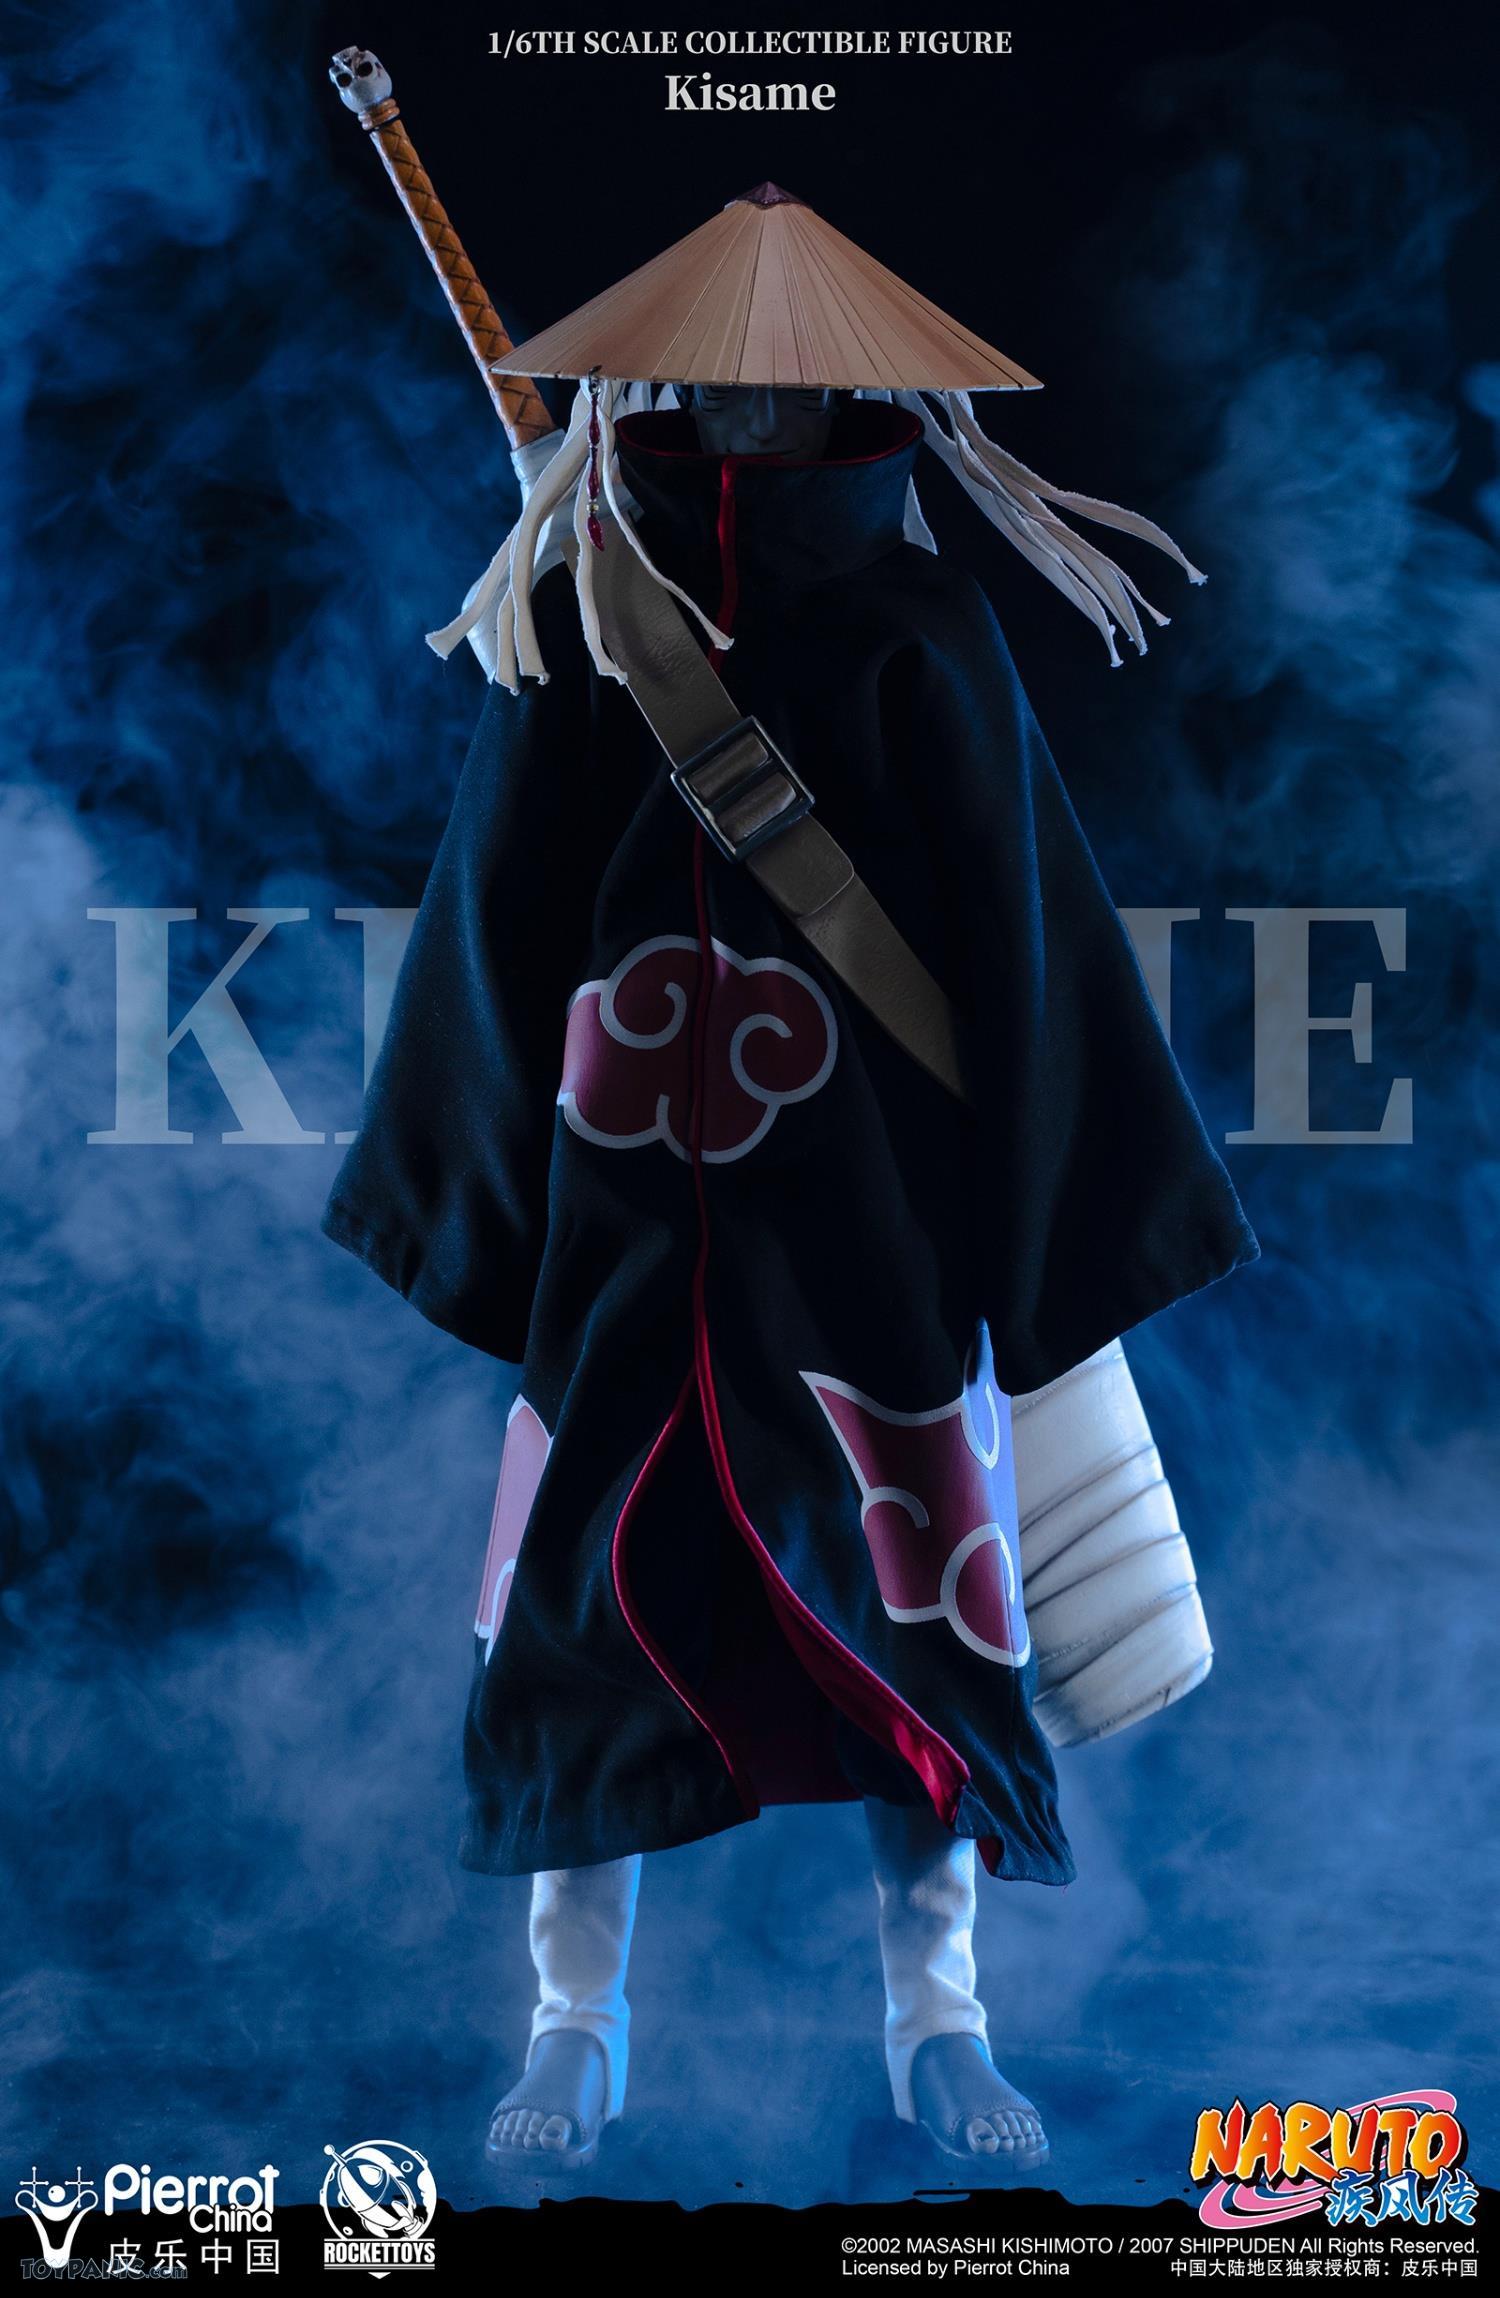 Fantasy - NEW PRODUCT: Rocket Toys ROC-007 1/6 Scale Kisame 221202460438PM_9230500